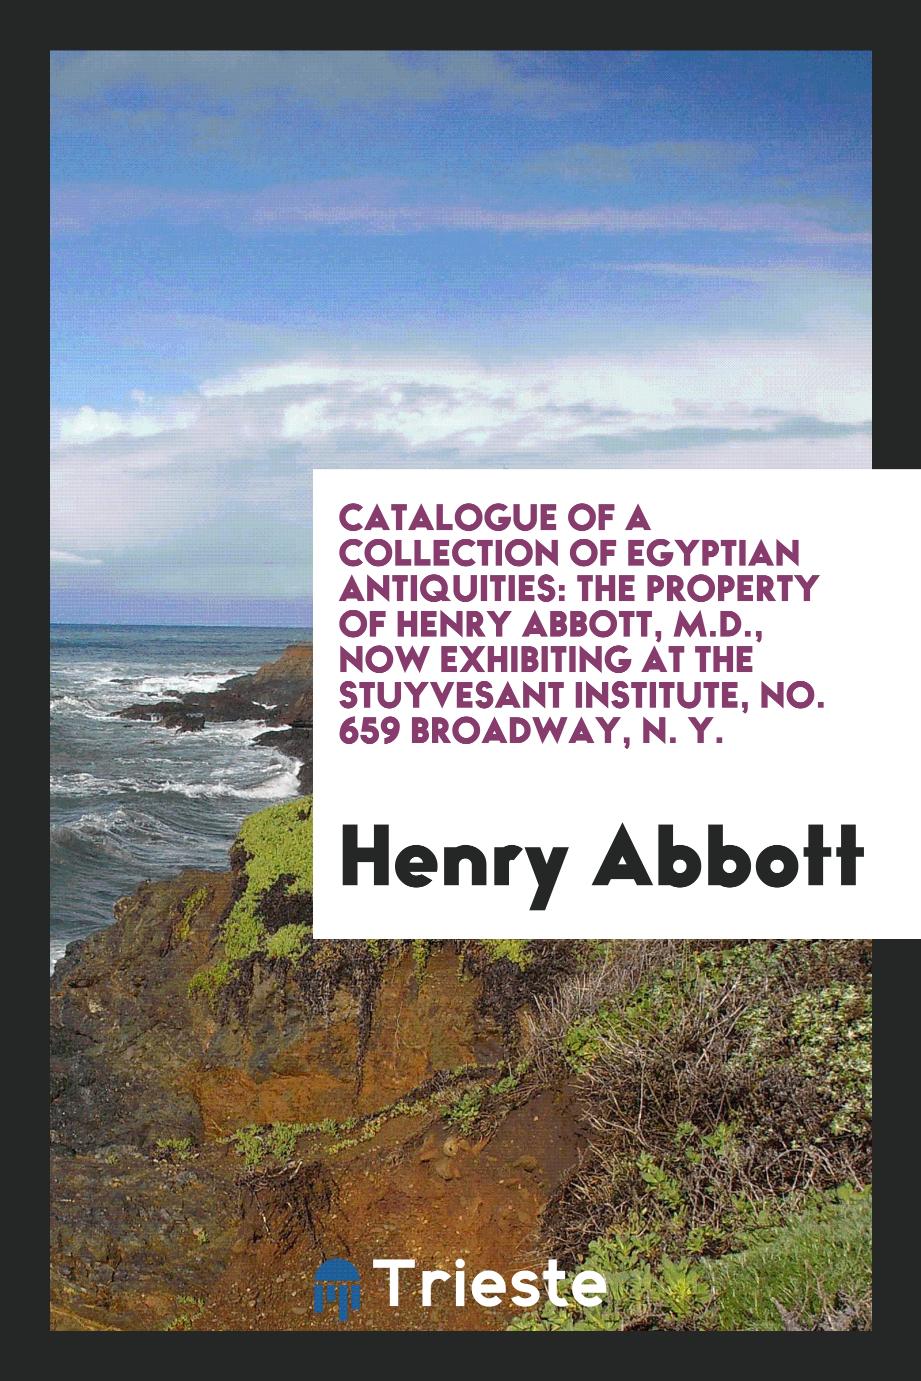 Catalogue of a Collection of Egyptian Antiquities: The Property of Henry Abbott, M.D., Now Exhibiting at the Stuyvesant Institute, No. 659 Broadway, N. Y.